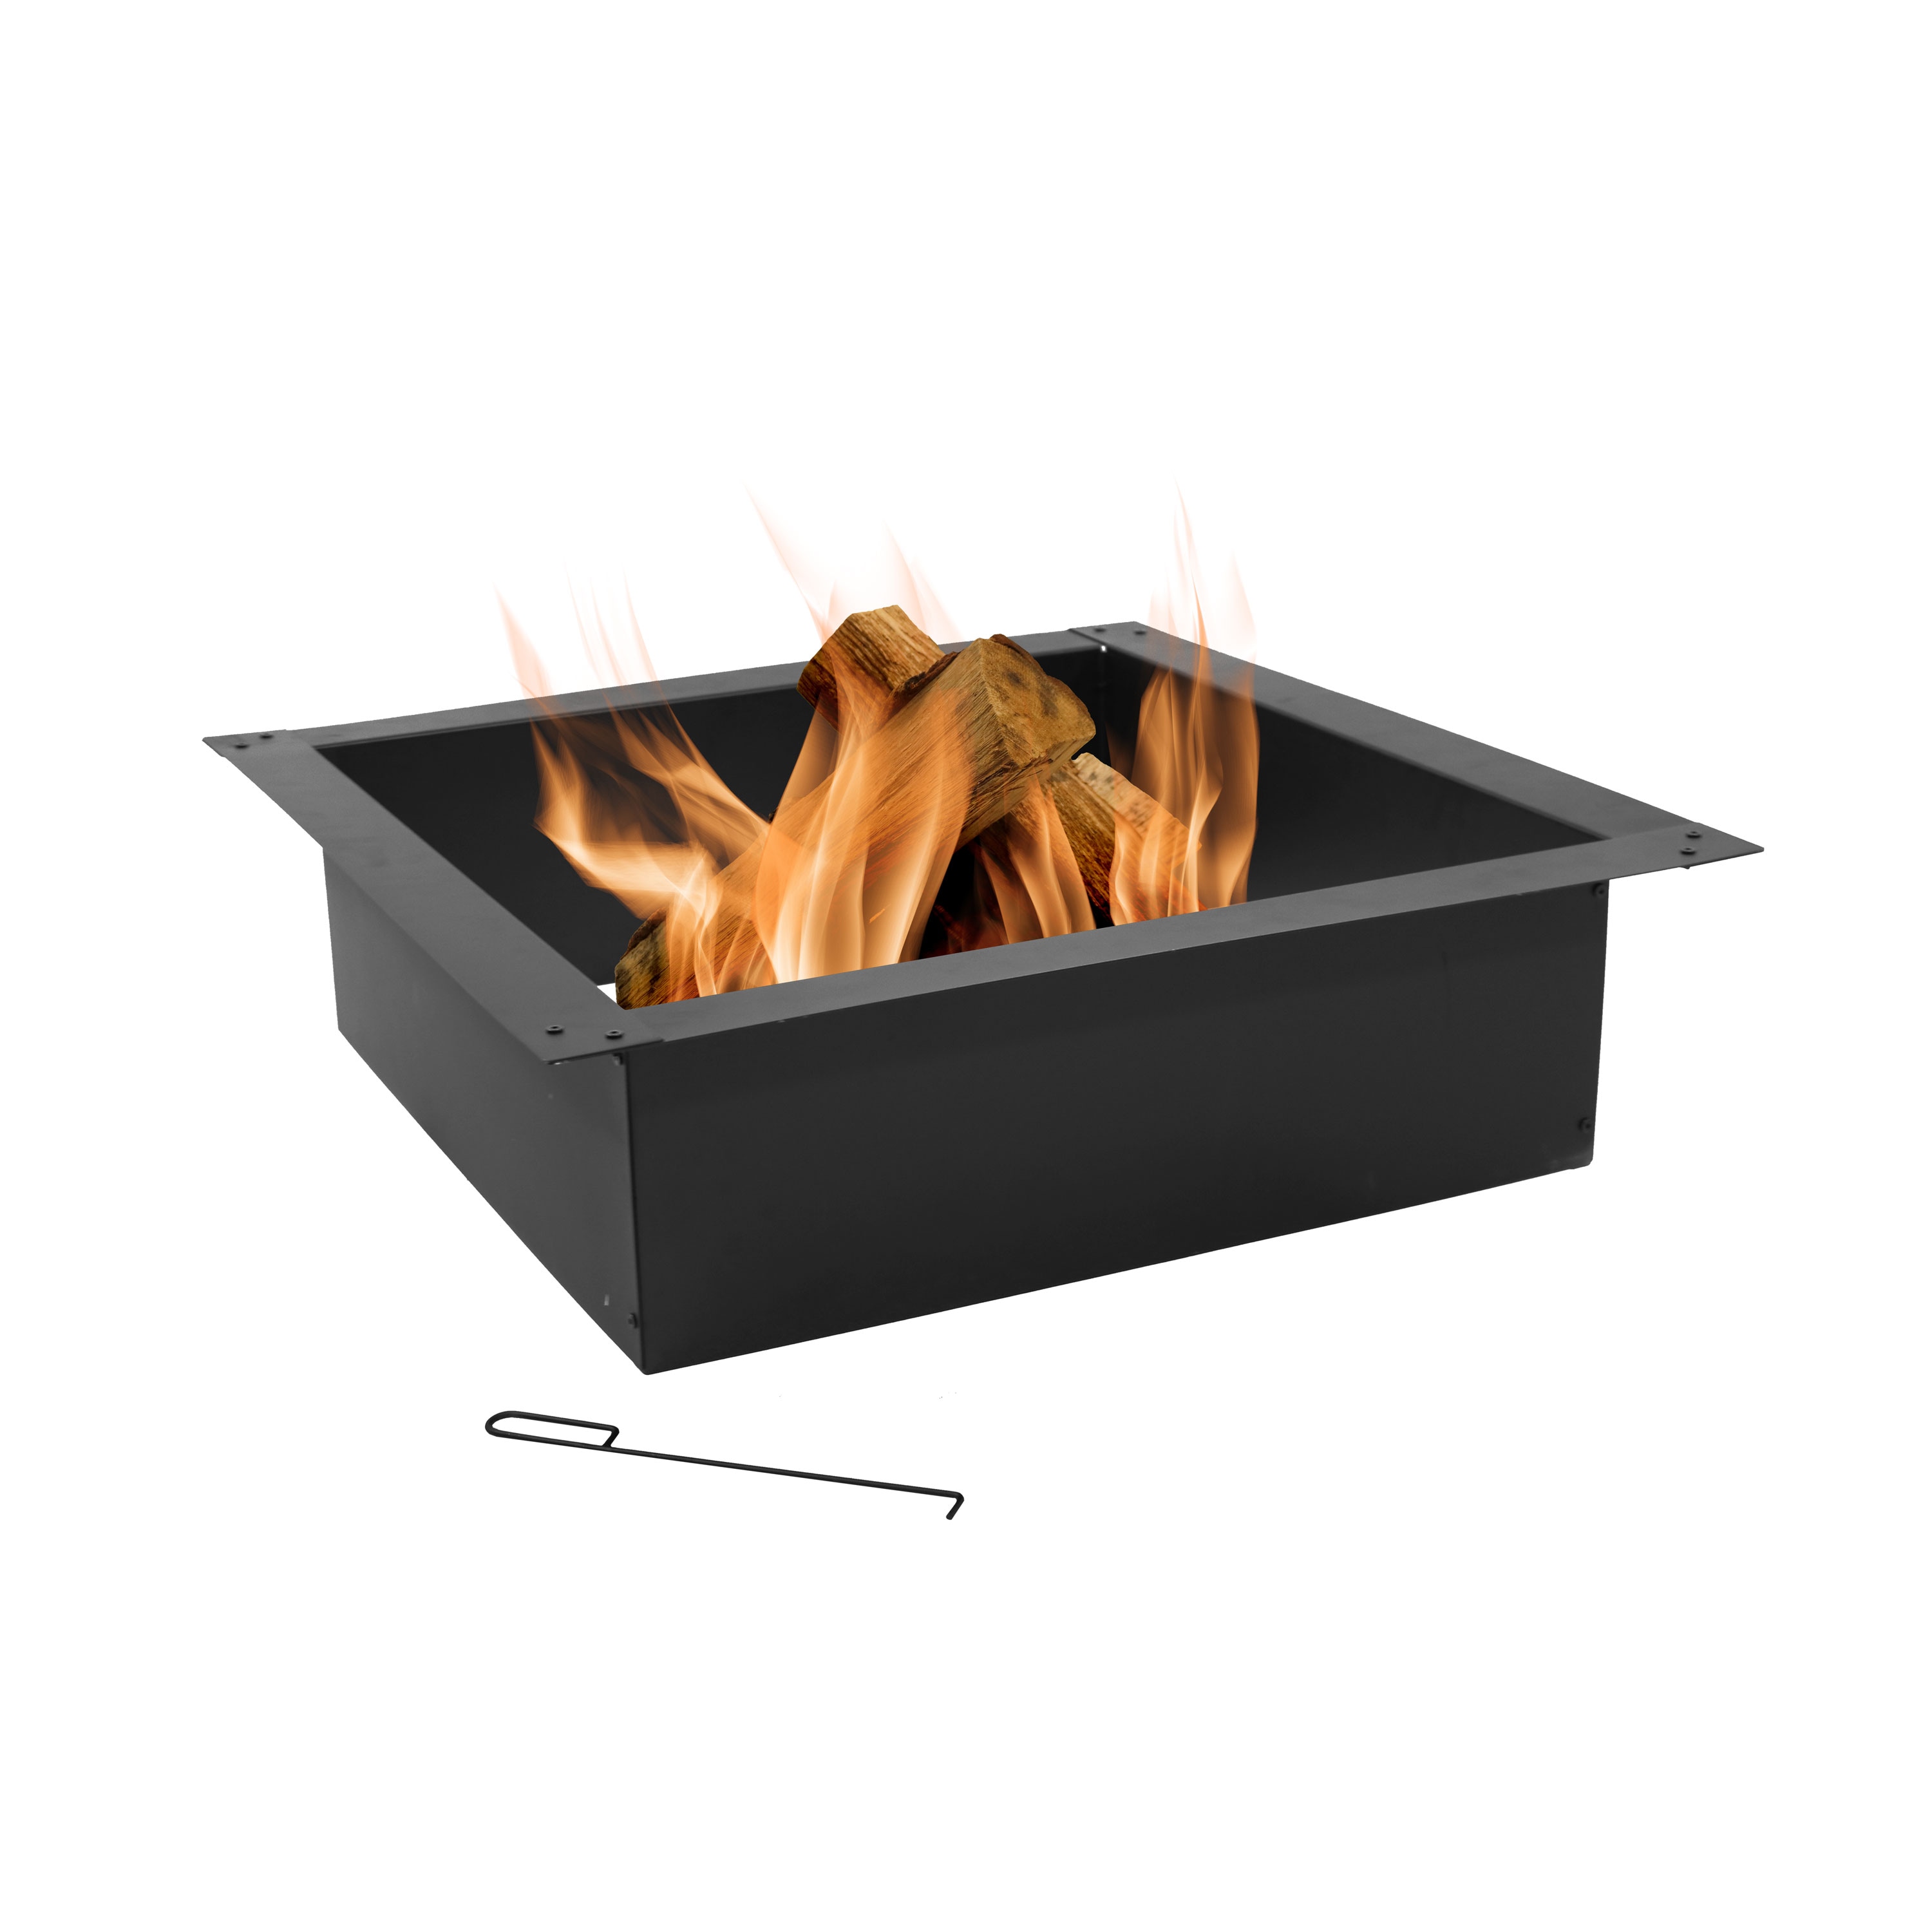 Necessories Grand 48 in. Fire Pit Kit in Bluestone with Cooking Grate  3500006 - The Home Depot